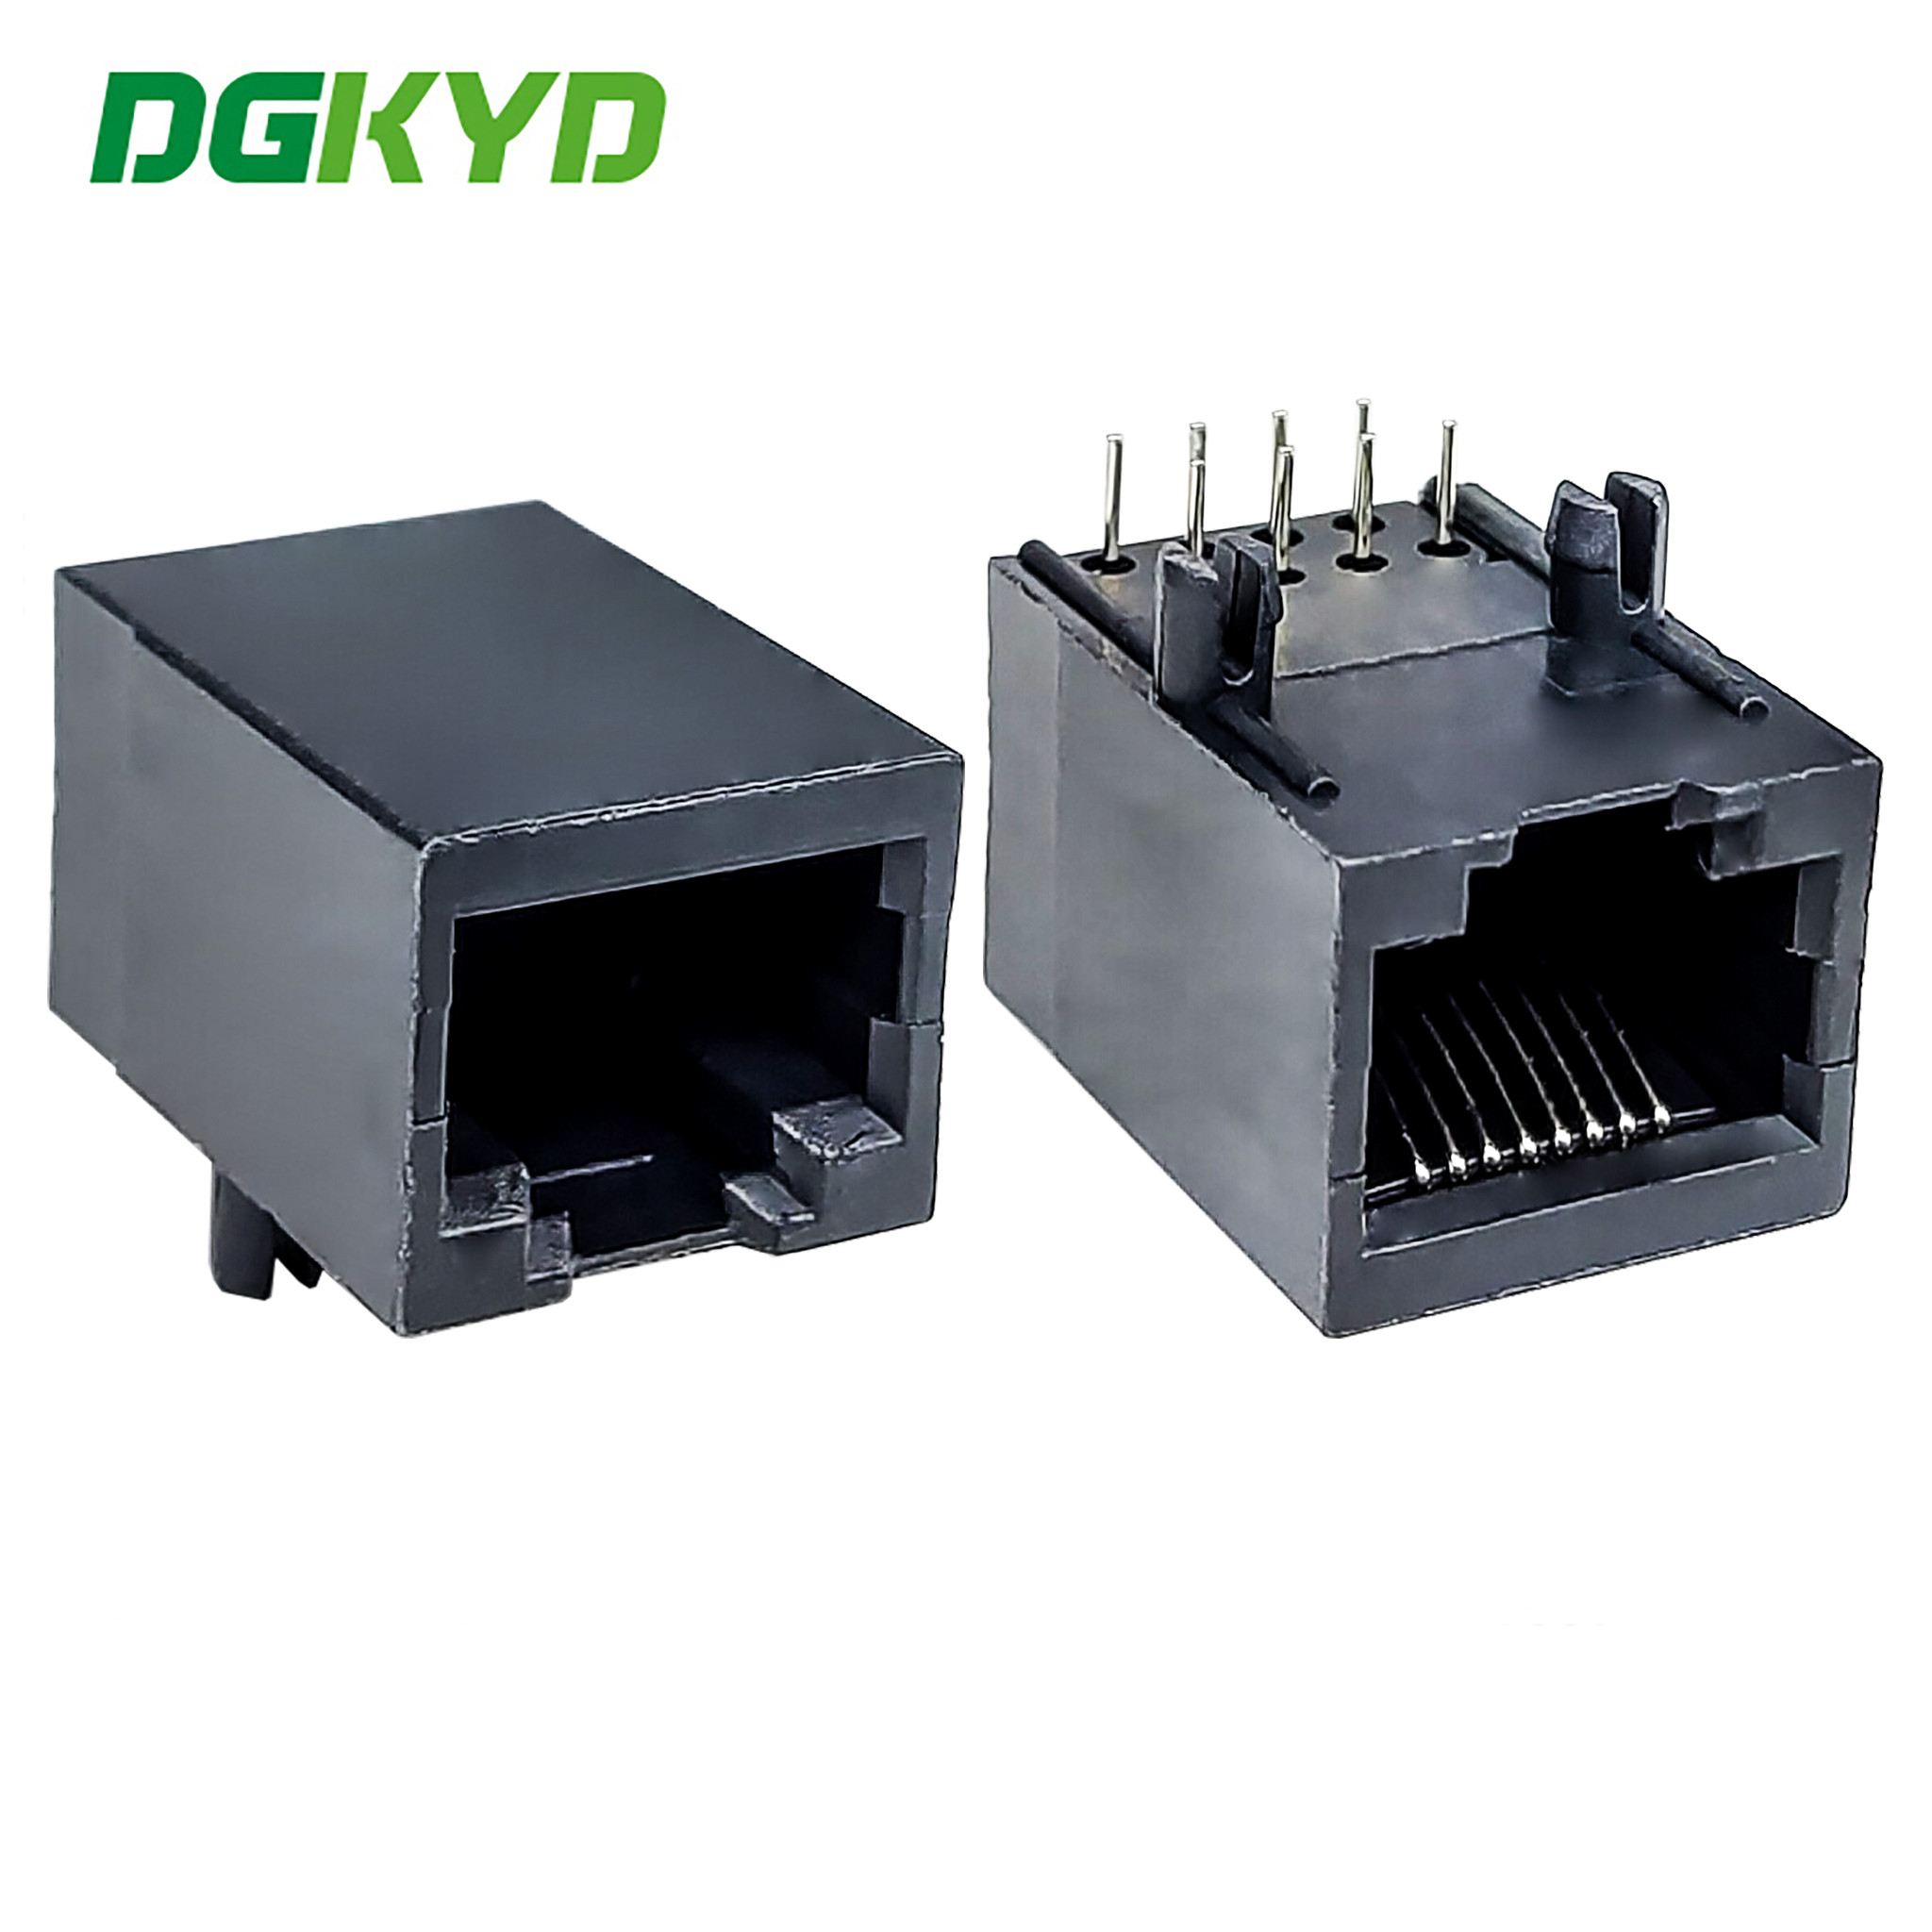 China RJ45 Connector 5921 Non Lamp Fully Plastic 8P8C Round Pin Socket DGKYD59211188IWA1DY1 factory